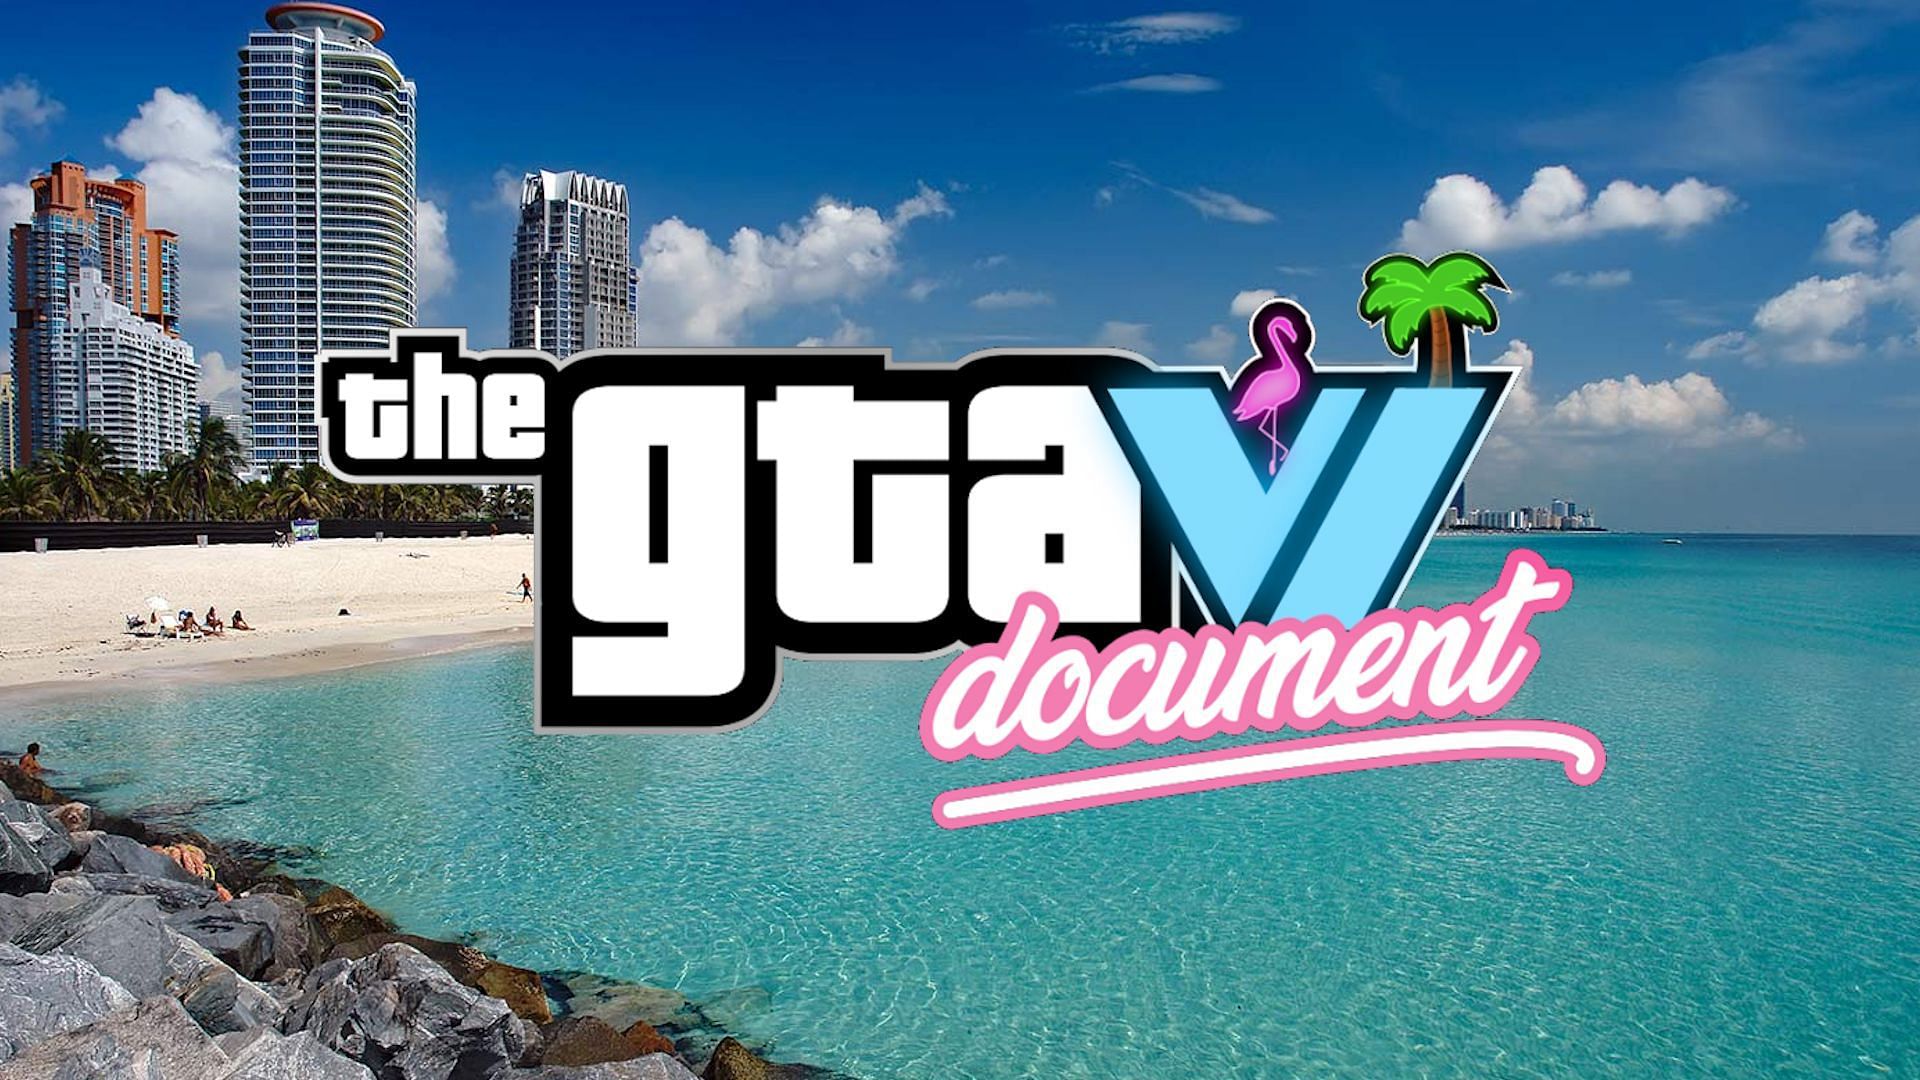 GTA 6 has a 60 page fan document showing every leak and piece of